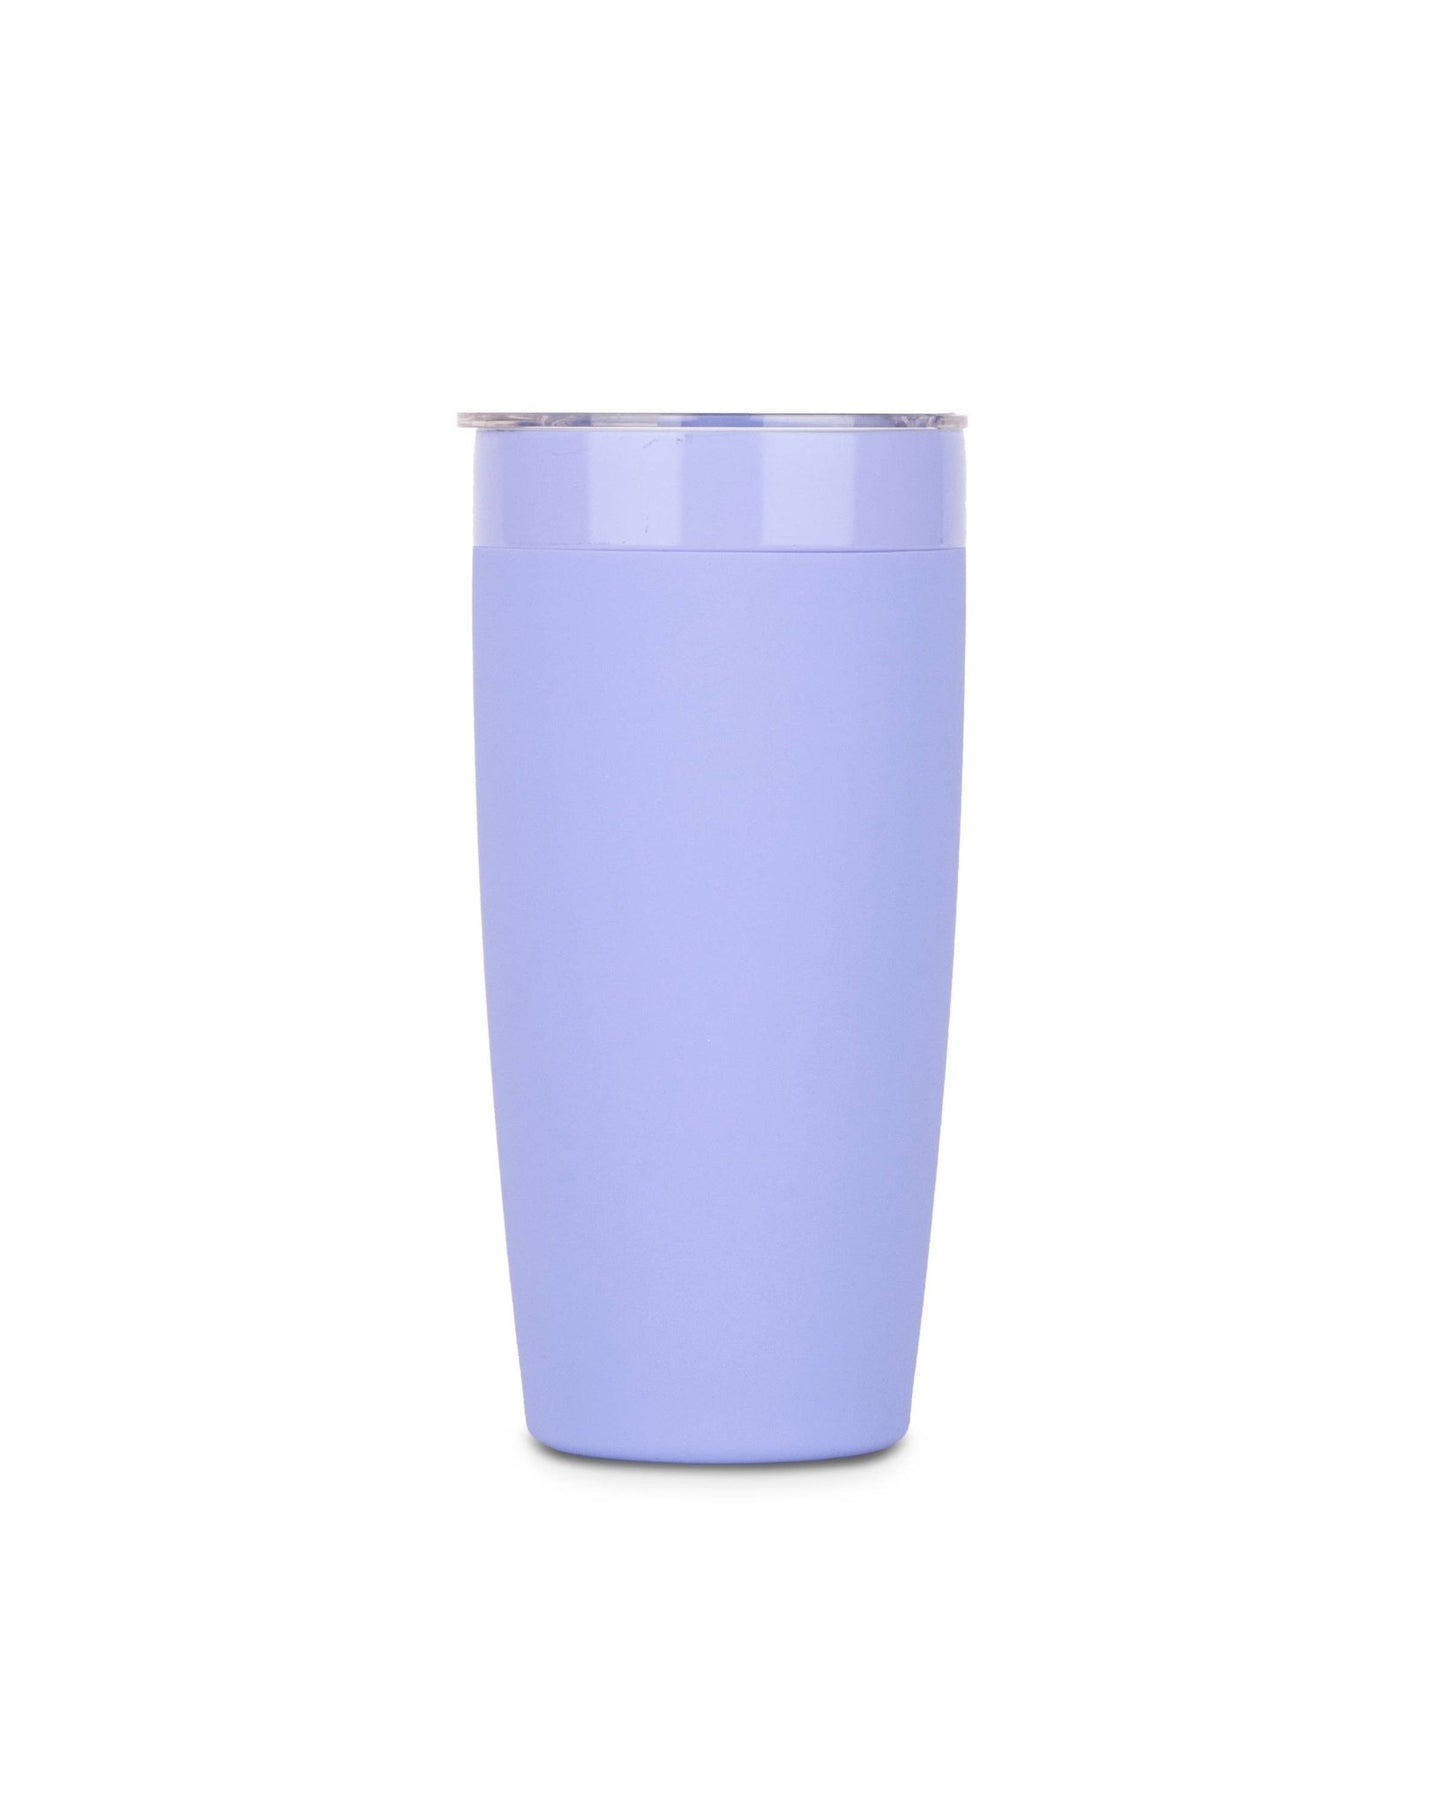 Insulated Ceramic Stainless Steel Coffee and Drink Tumbler - Lavender - Echo Market